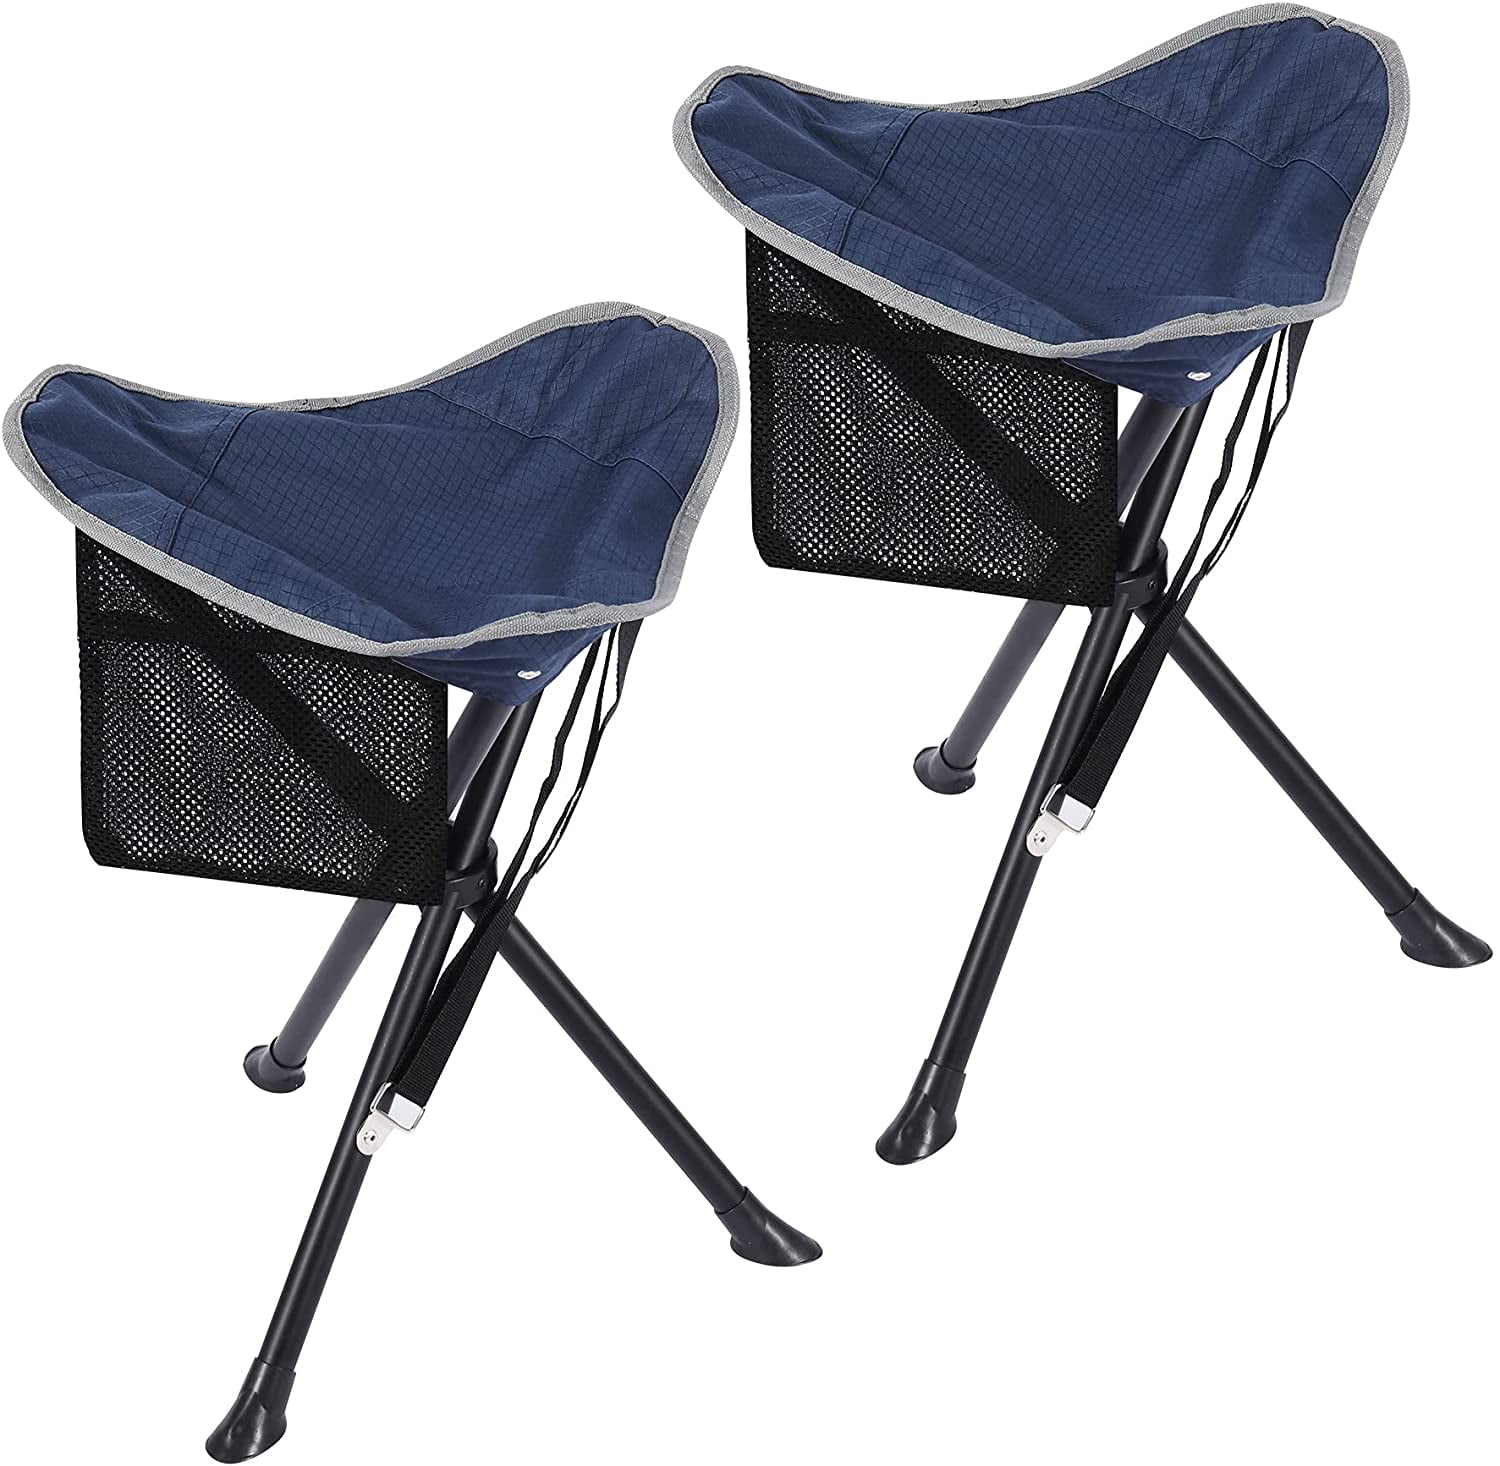 REDCAMP 2 Pack Tripod Hunting Chairs for Blinds, Portable Lightweight 3  Legged Stool Seat with Backrest, Small Folding Chairs for Travel Fishing